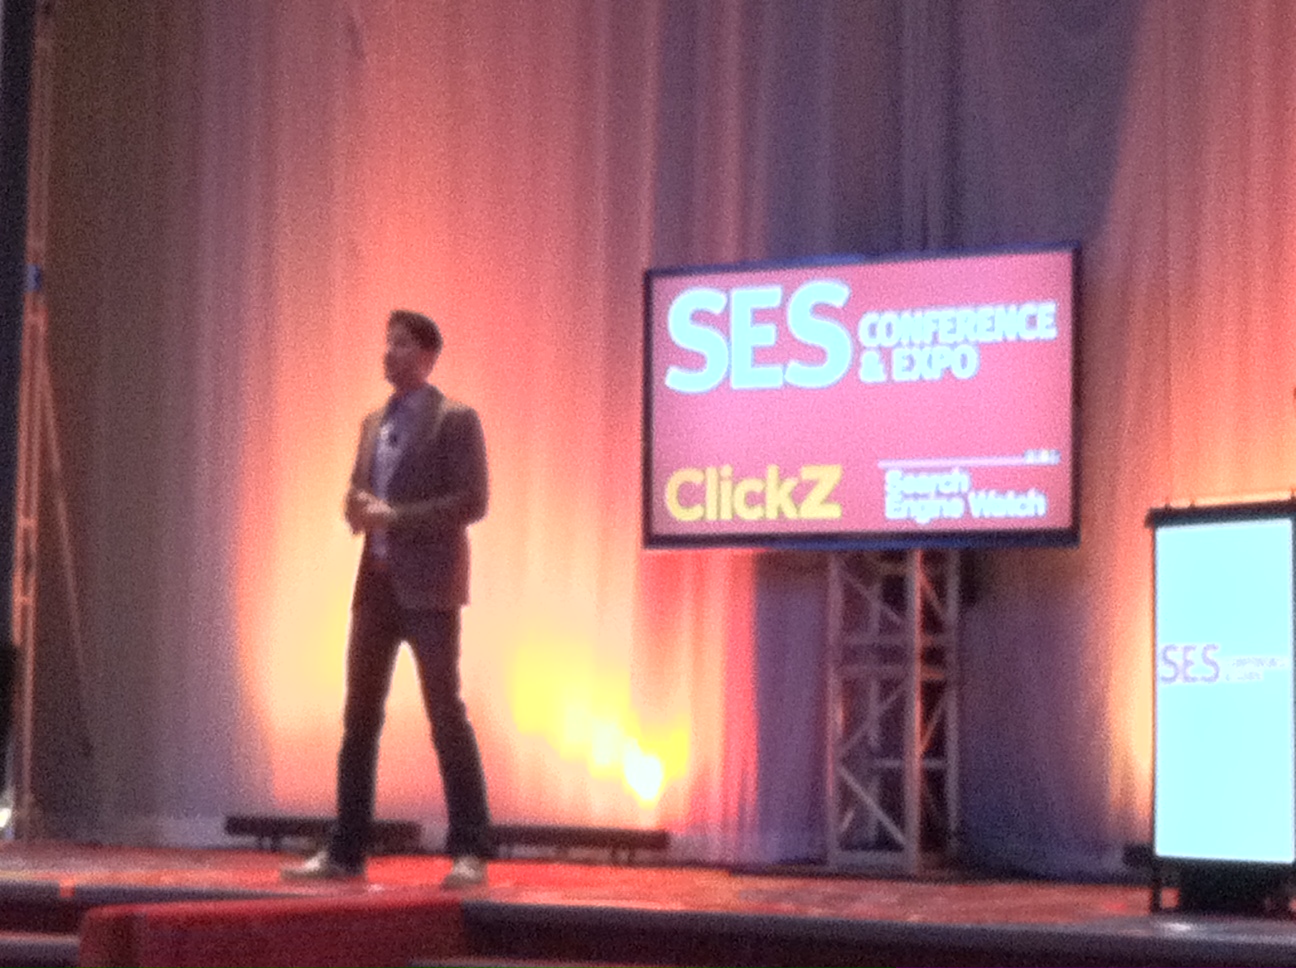 Hill Holliday's senior VP and director of social media Mike Proulx delivers a resounding keynote speech at SES NY.